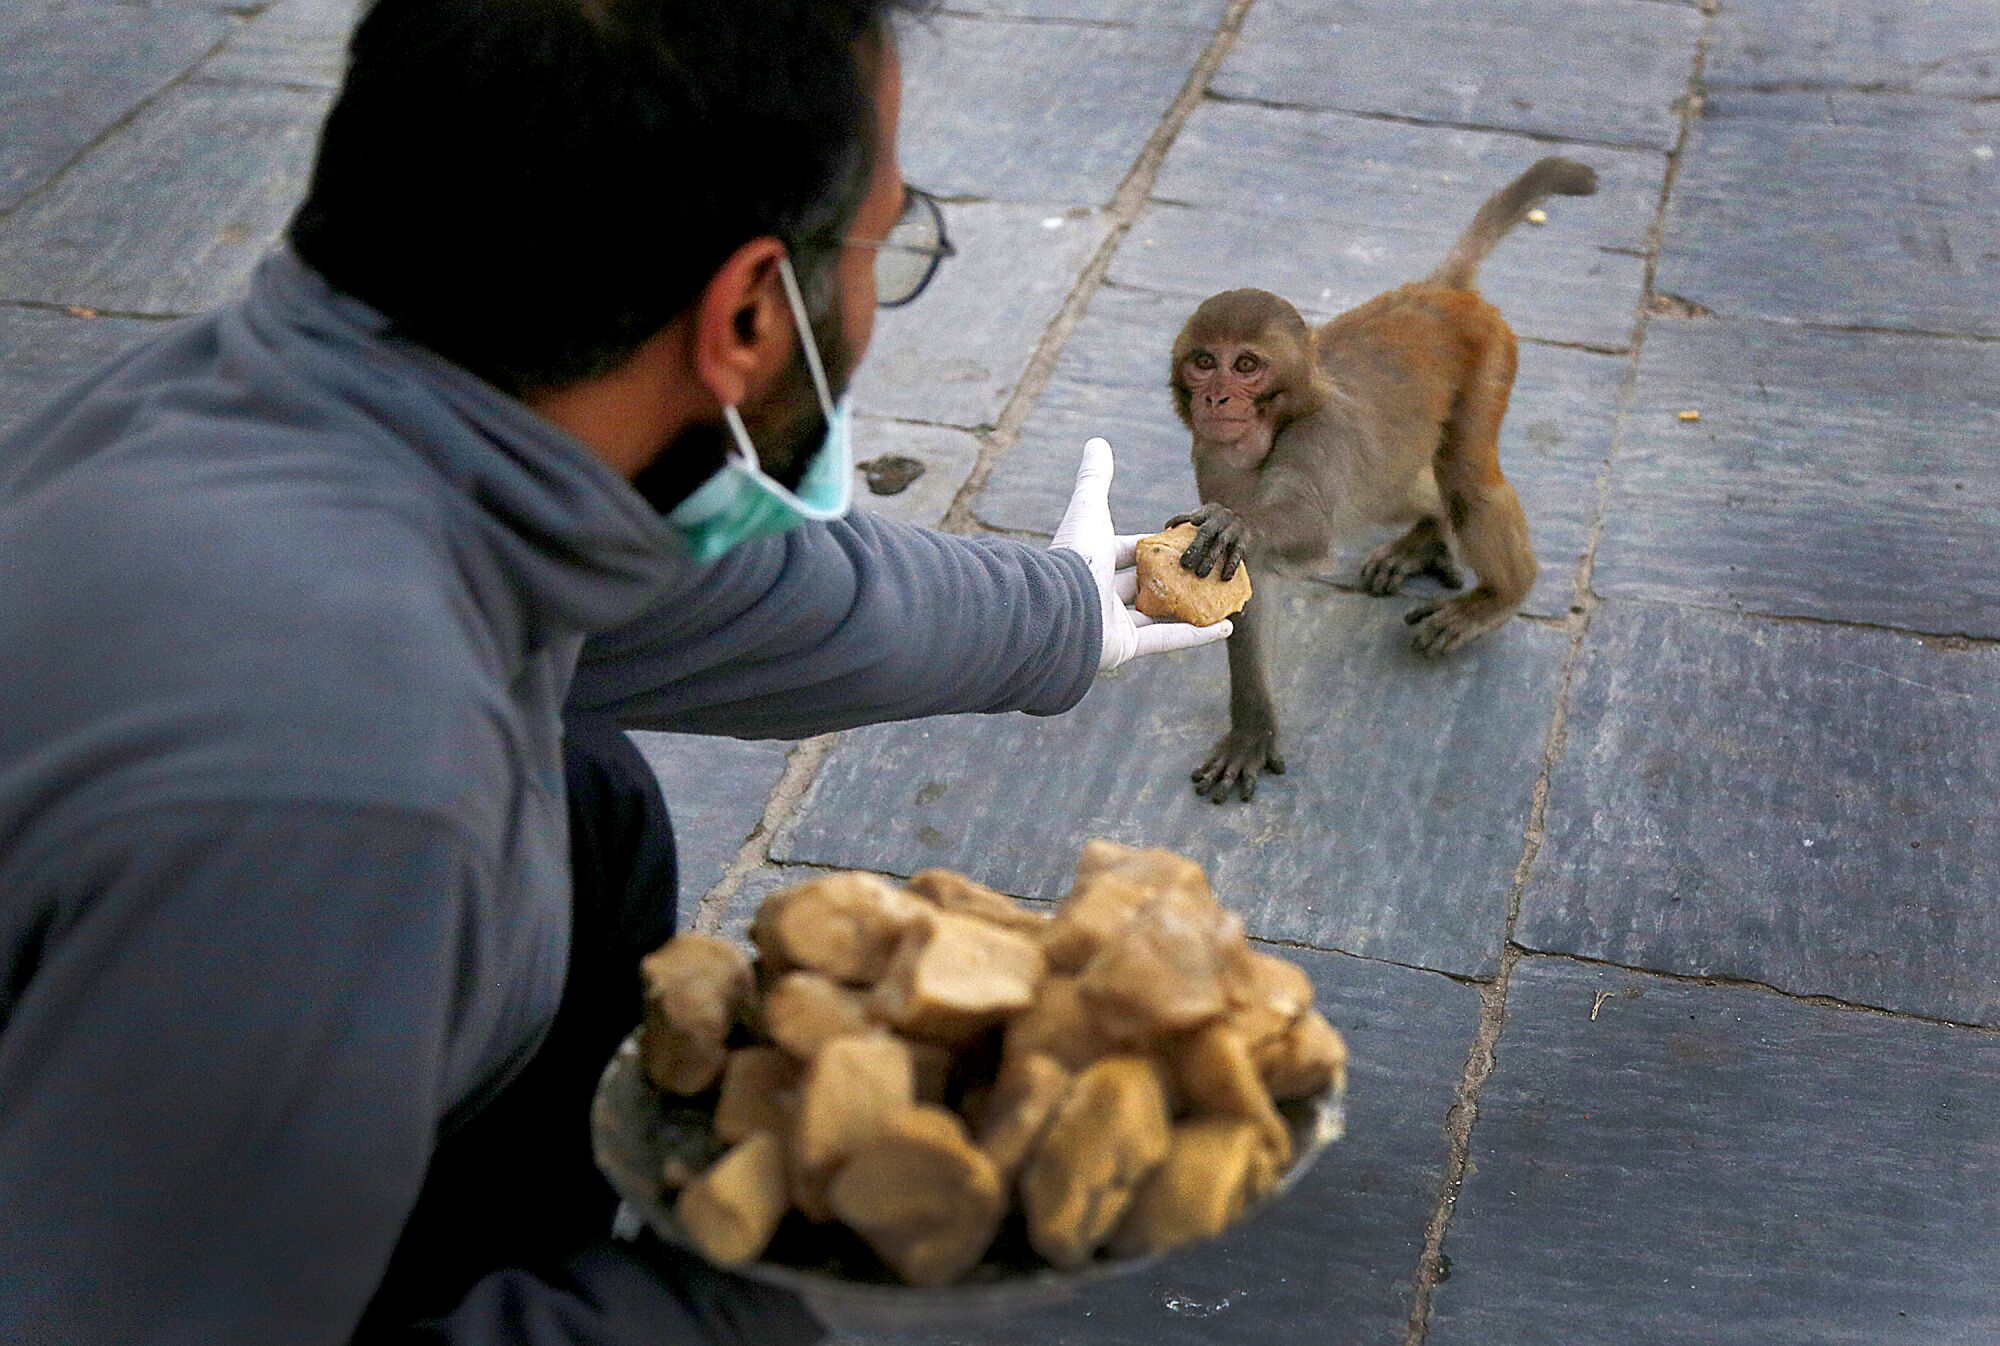 NEPAL: A Nepalese volunteer feeds monkeys March 31 at Pashupatinath temple, the country's most revered Hindu temple, during the lockdown in Kathmandu, Nepal. Guards, staff and volunteers are making sure animals and birds on the temple grounds don't starve during the country's lockdown.